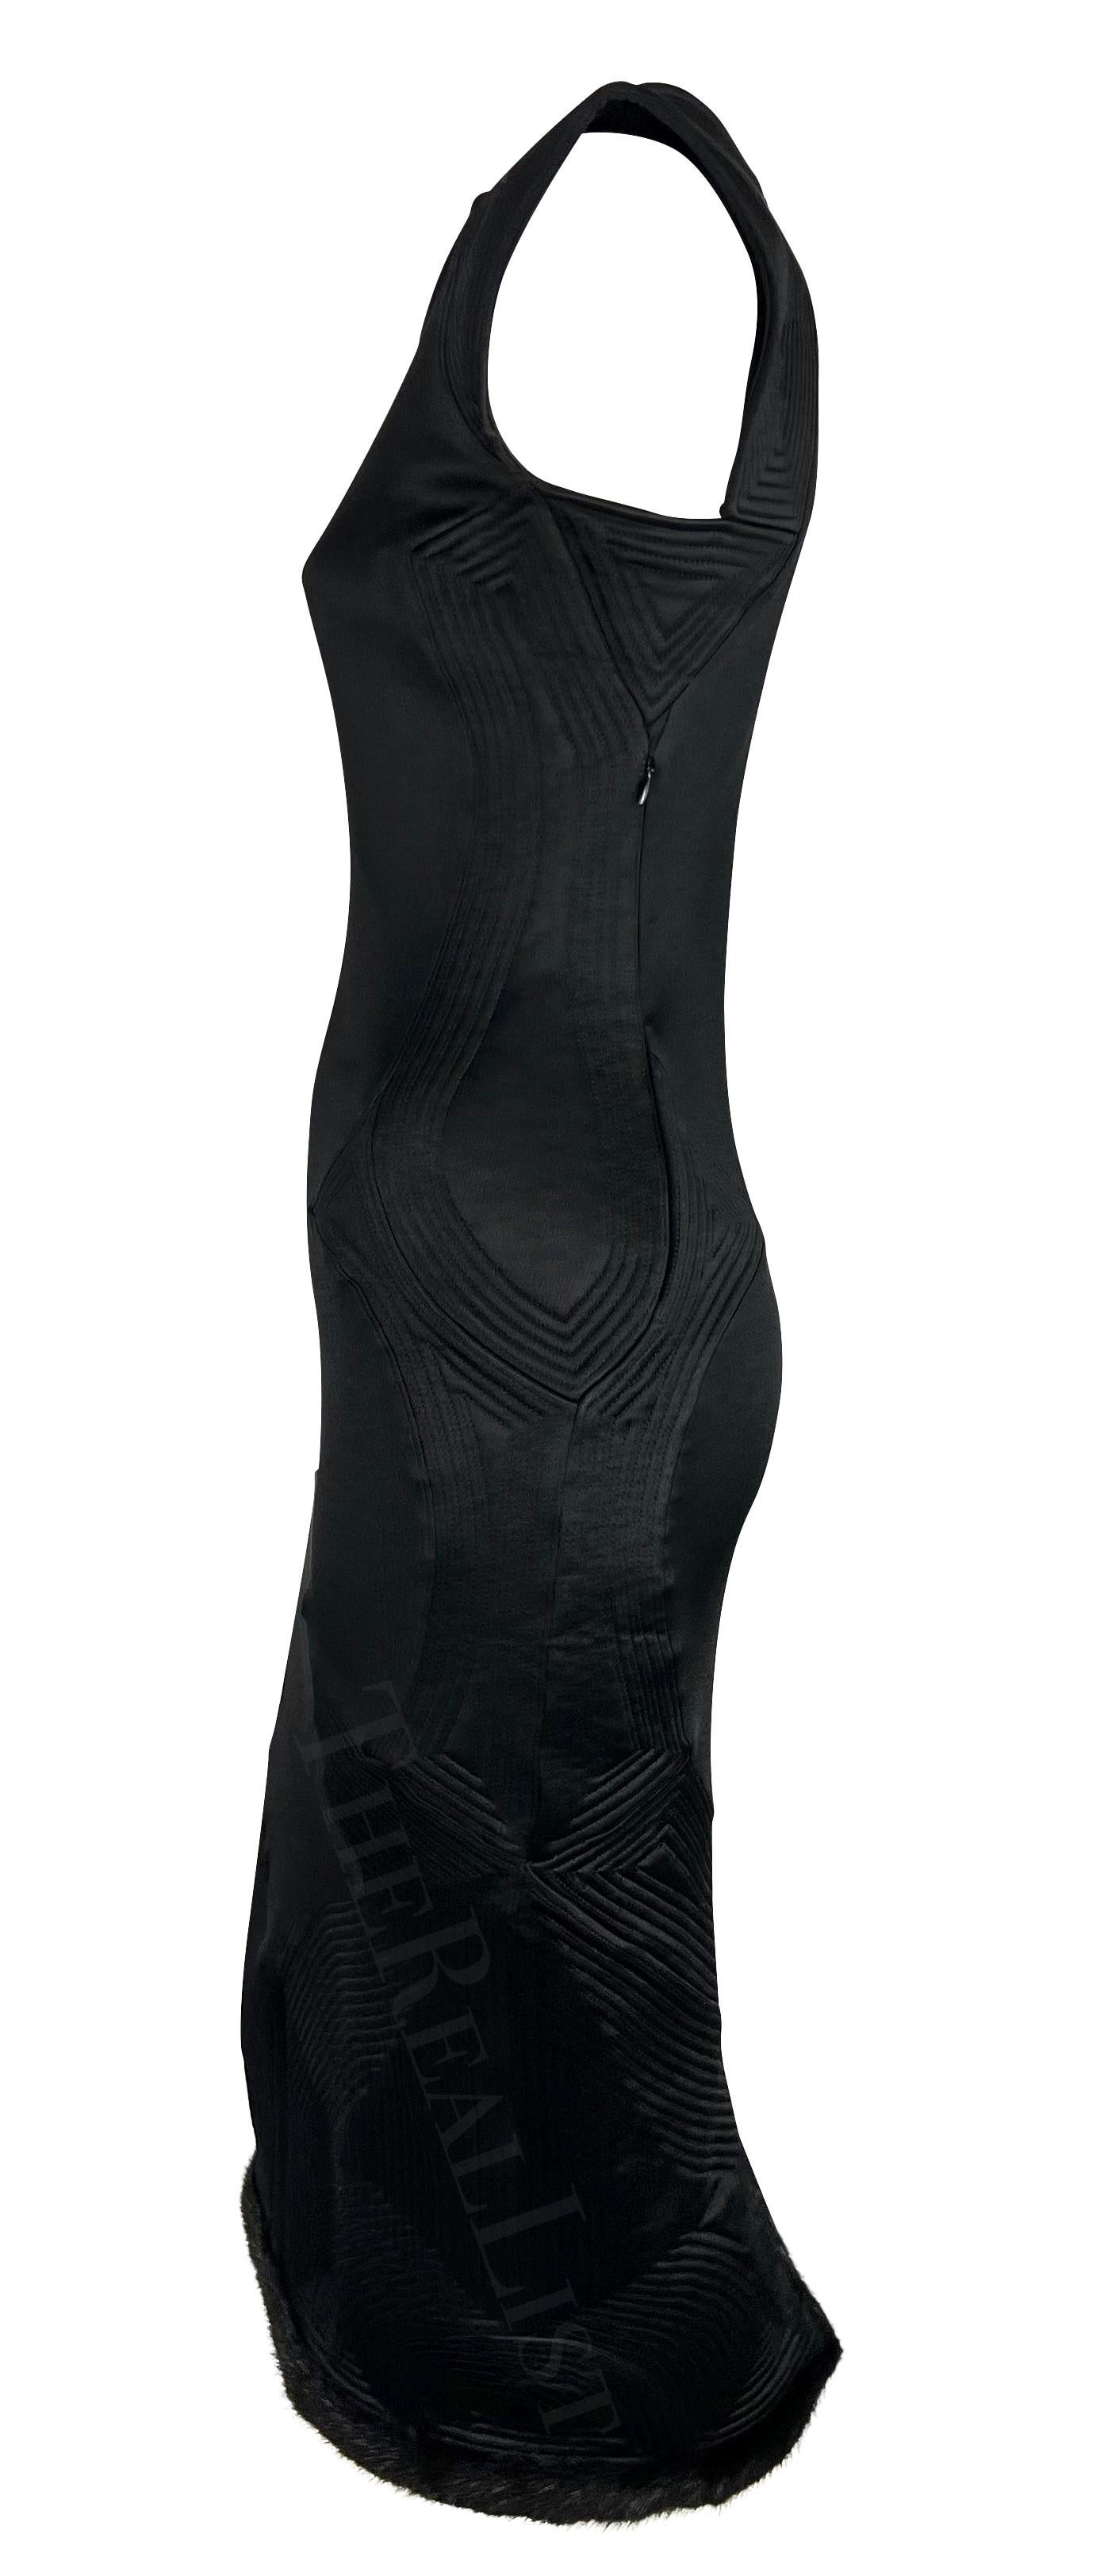 F/W 2004 Yves Saint Laurent by Tom Ford Black Mink Accented Midi Dress For Sale 1